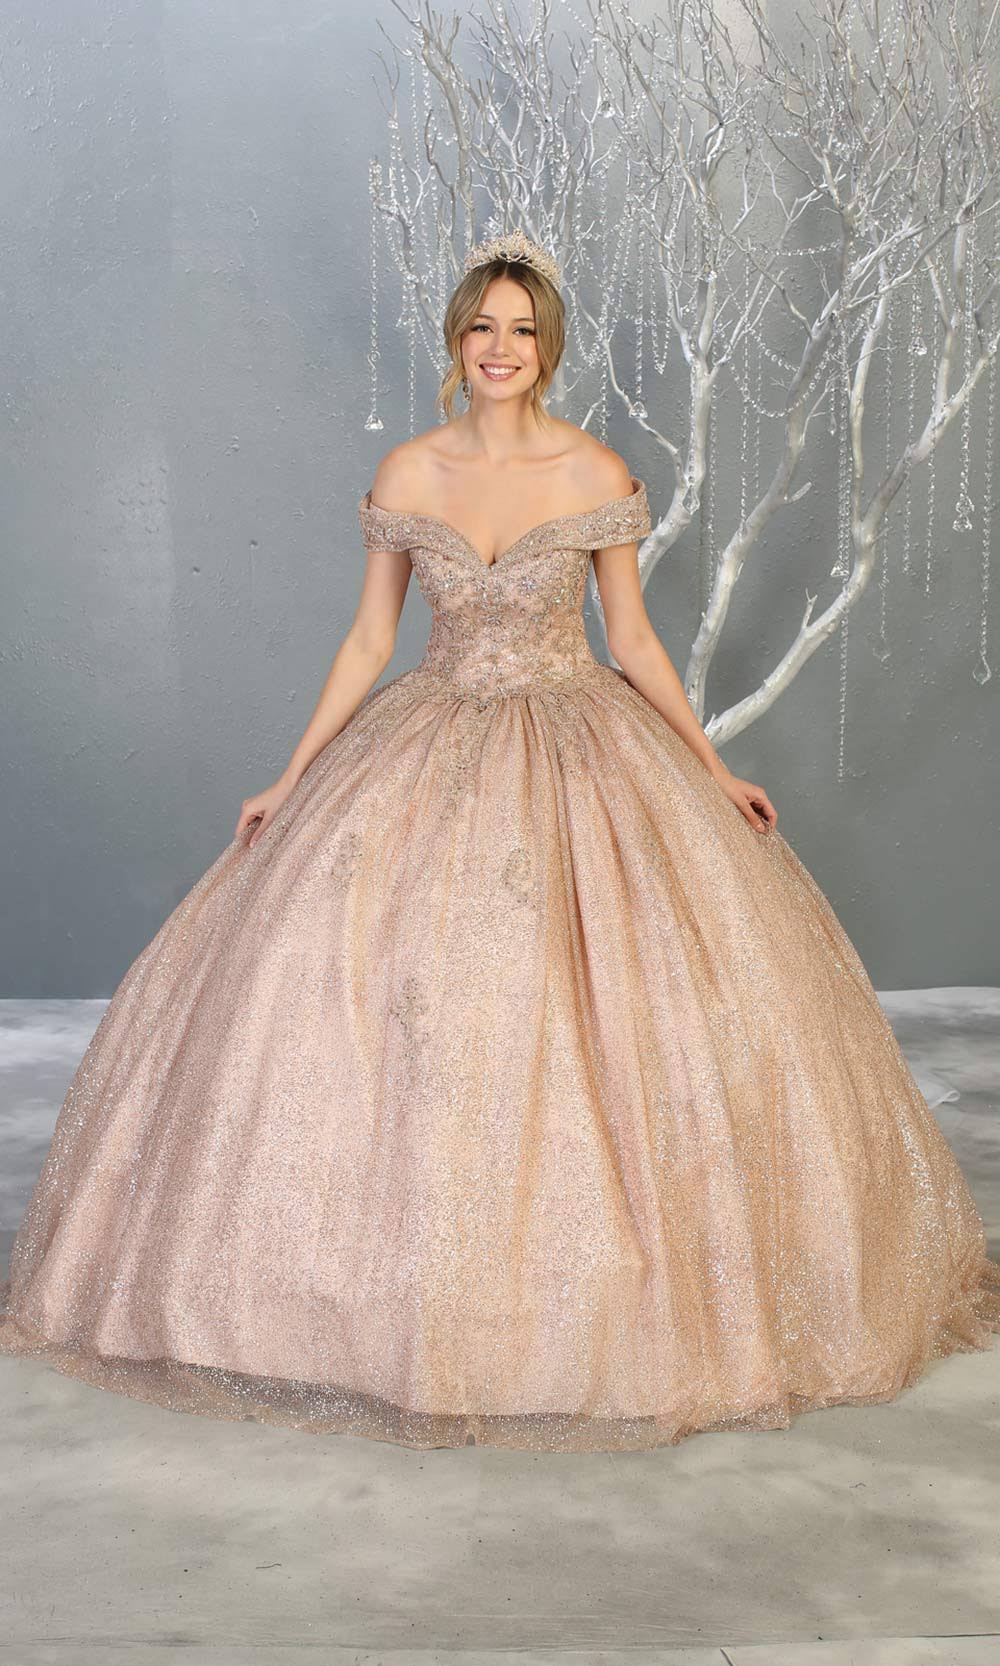 Mayqueen LK151 rose gold quinceanera off shoulder sequin ballgown. This rose gold shiny ball gown is perfect for engagement dress, wedding reception, indowestern party gown, sweet 16, debut, sweet 15, sweet 18. Plus sizes available for gold ballgowns.jpg